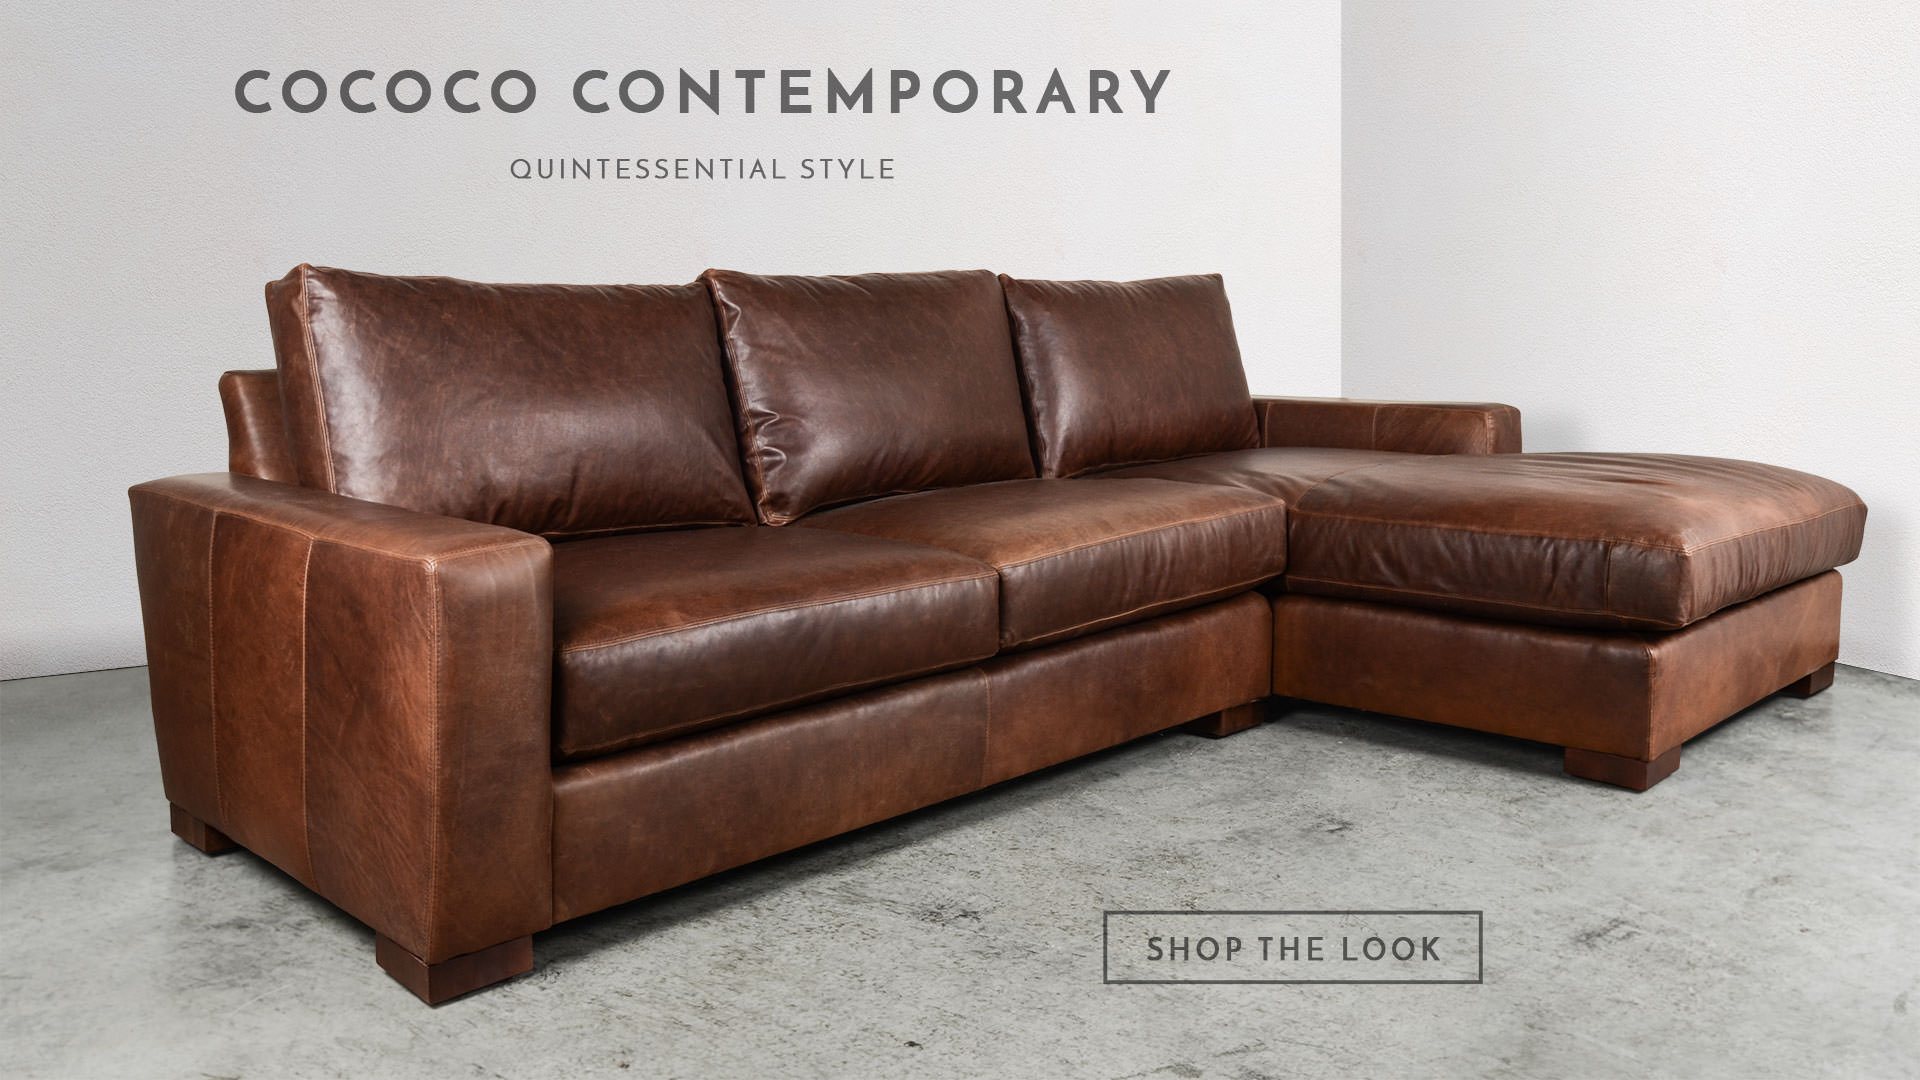 Chesterfield Sofas, Custom Upholstered Furniture USA | COCOCOHome - Button to view Contemporary Collection